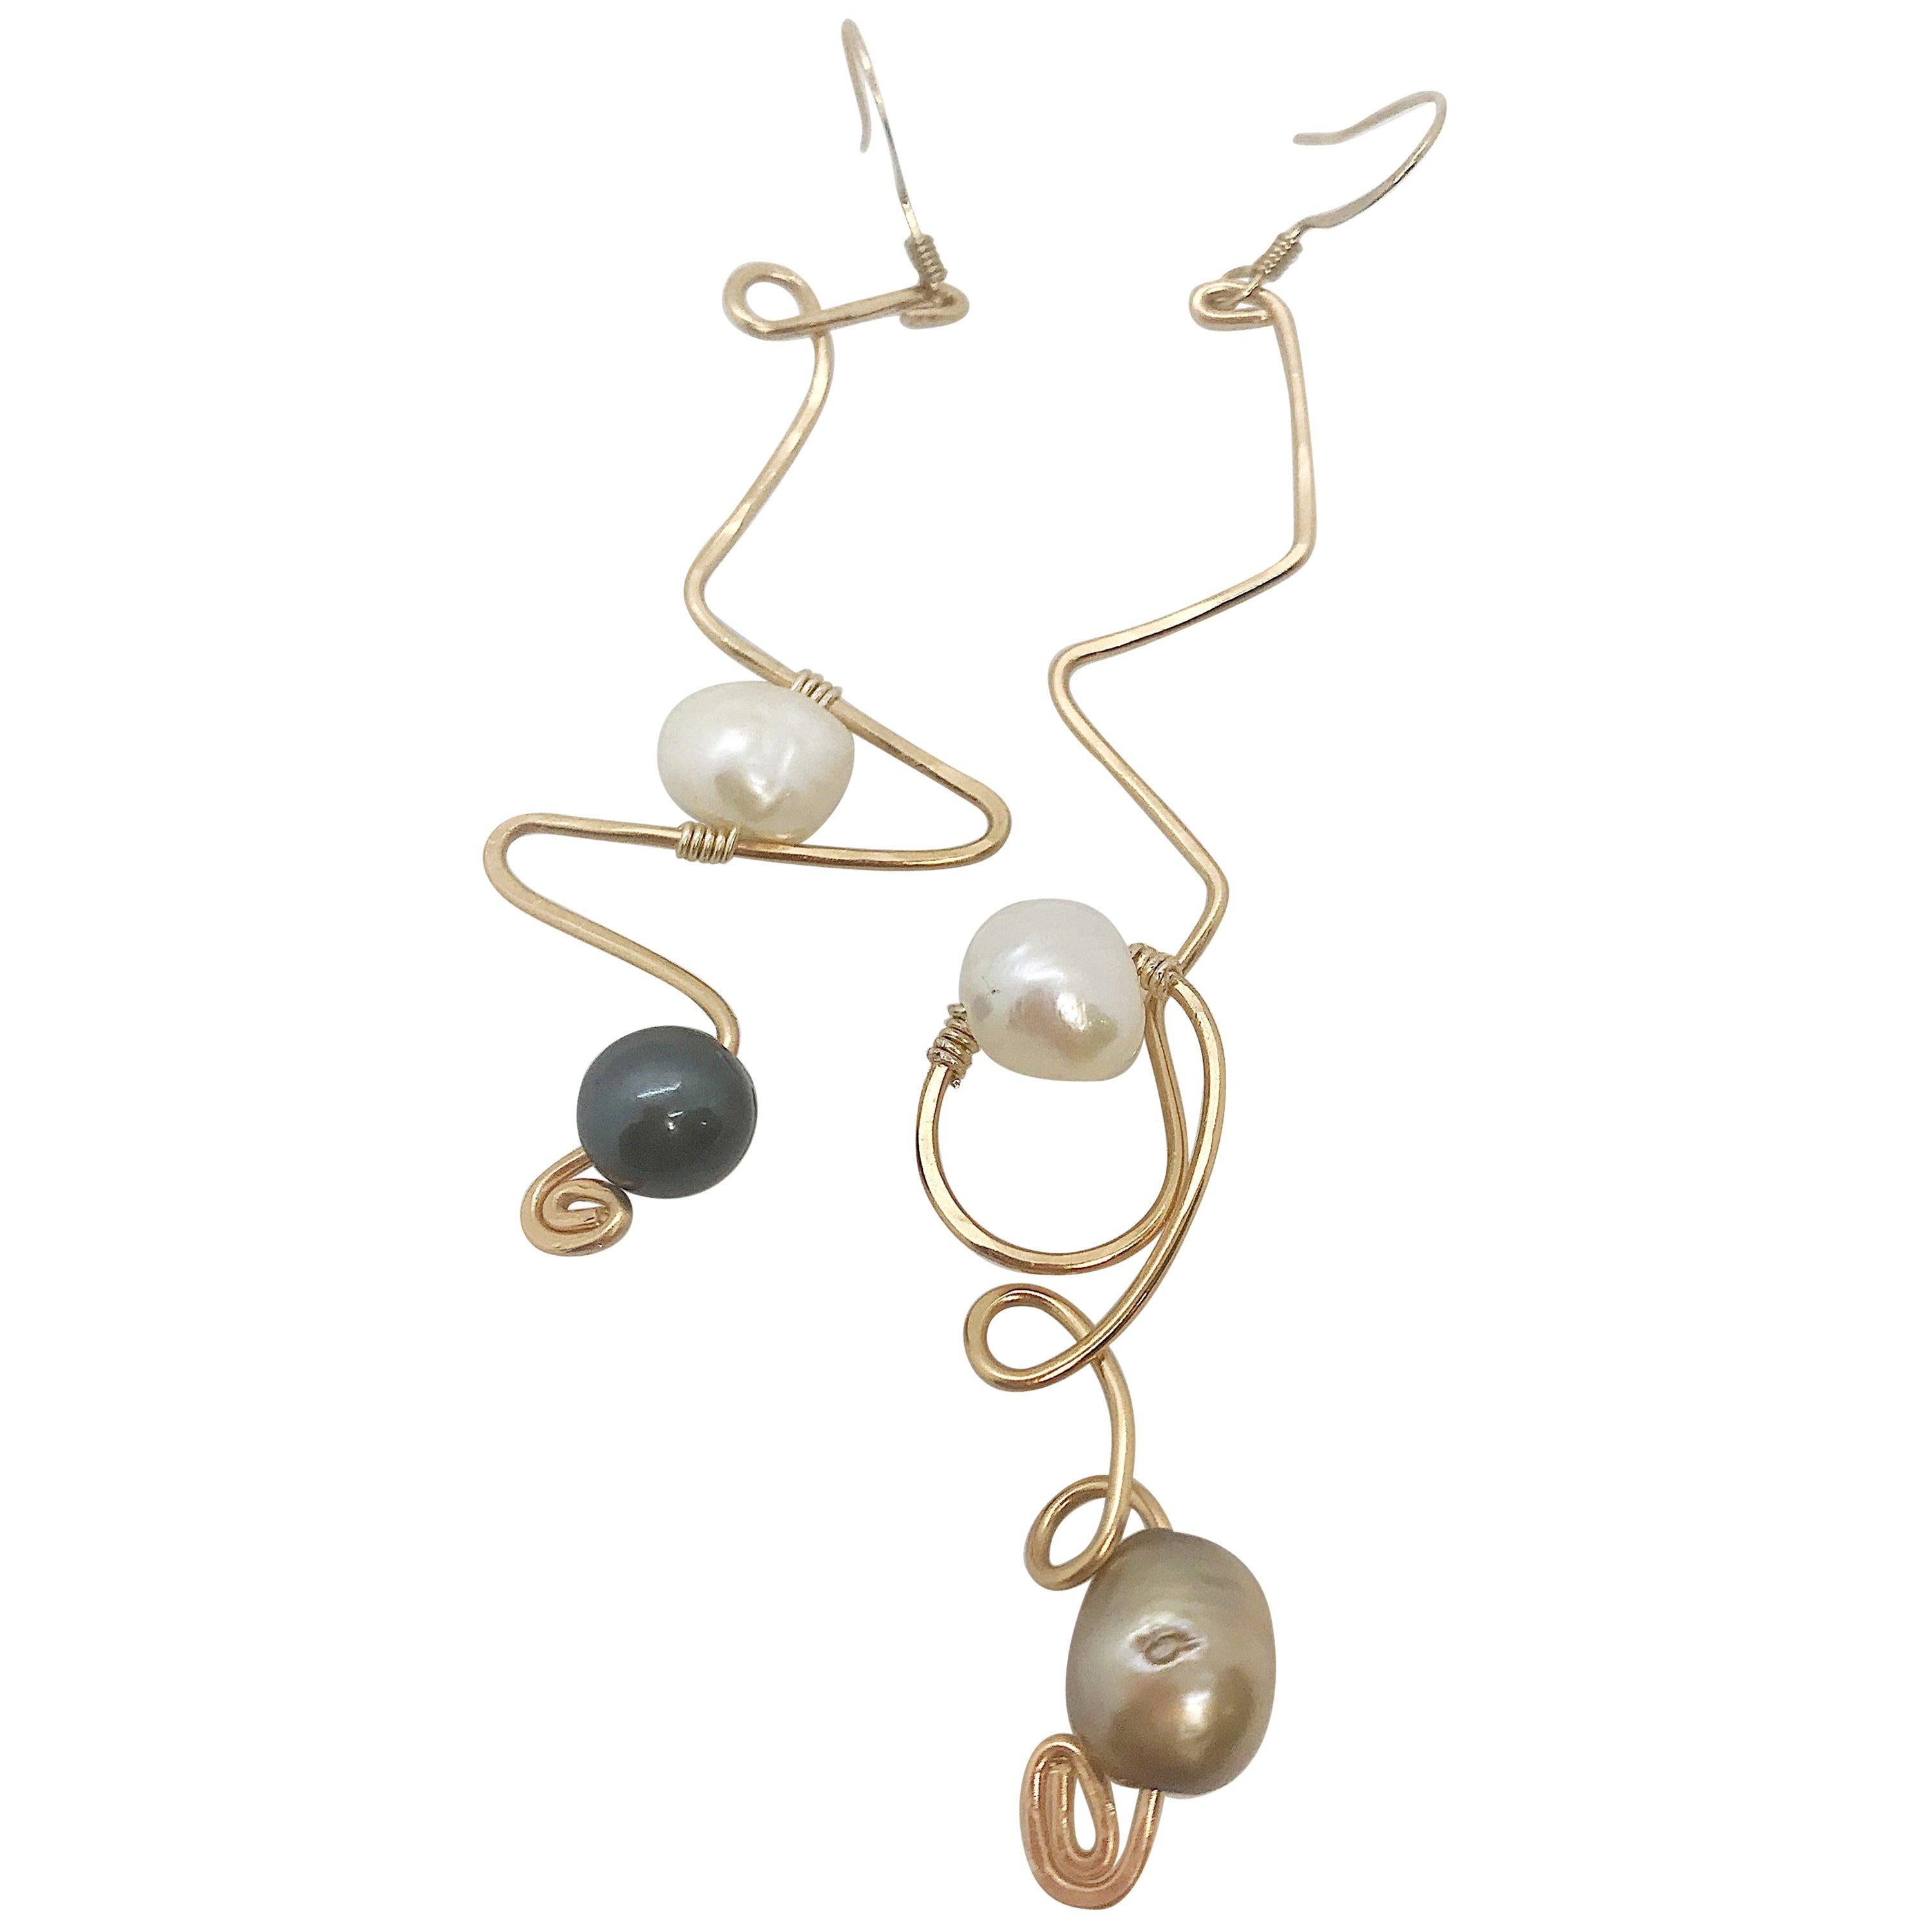 Sidney Cherie Studio Texture Gold brass Earrings with Freshwater Pearls For Sale